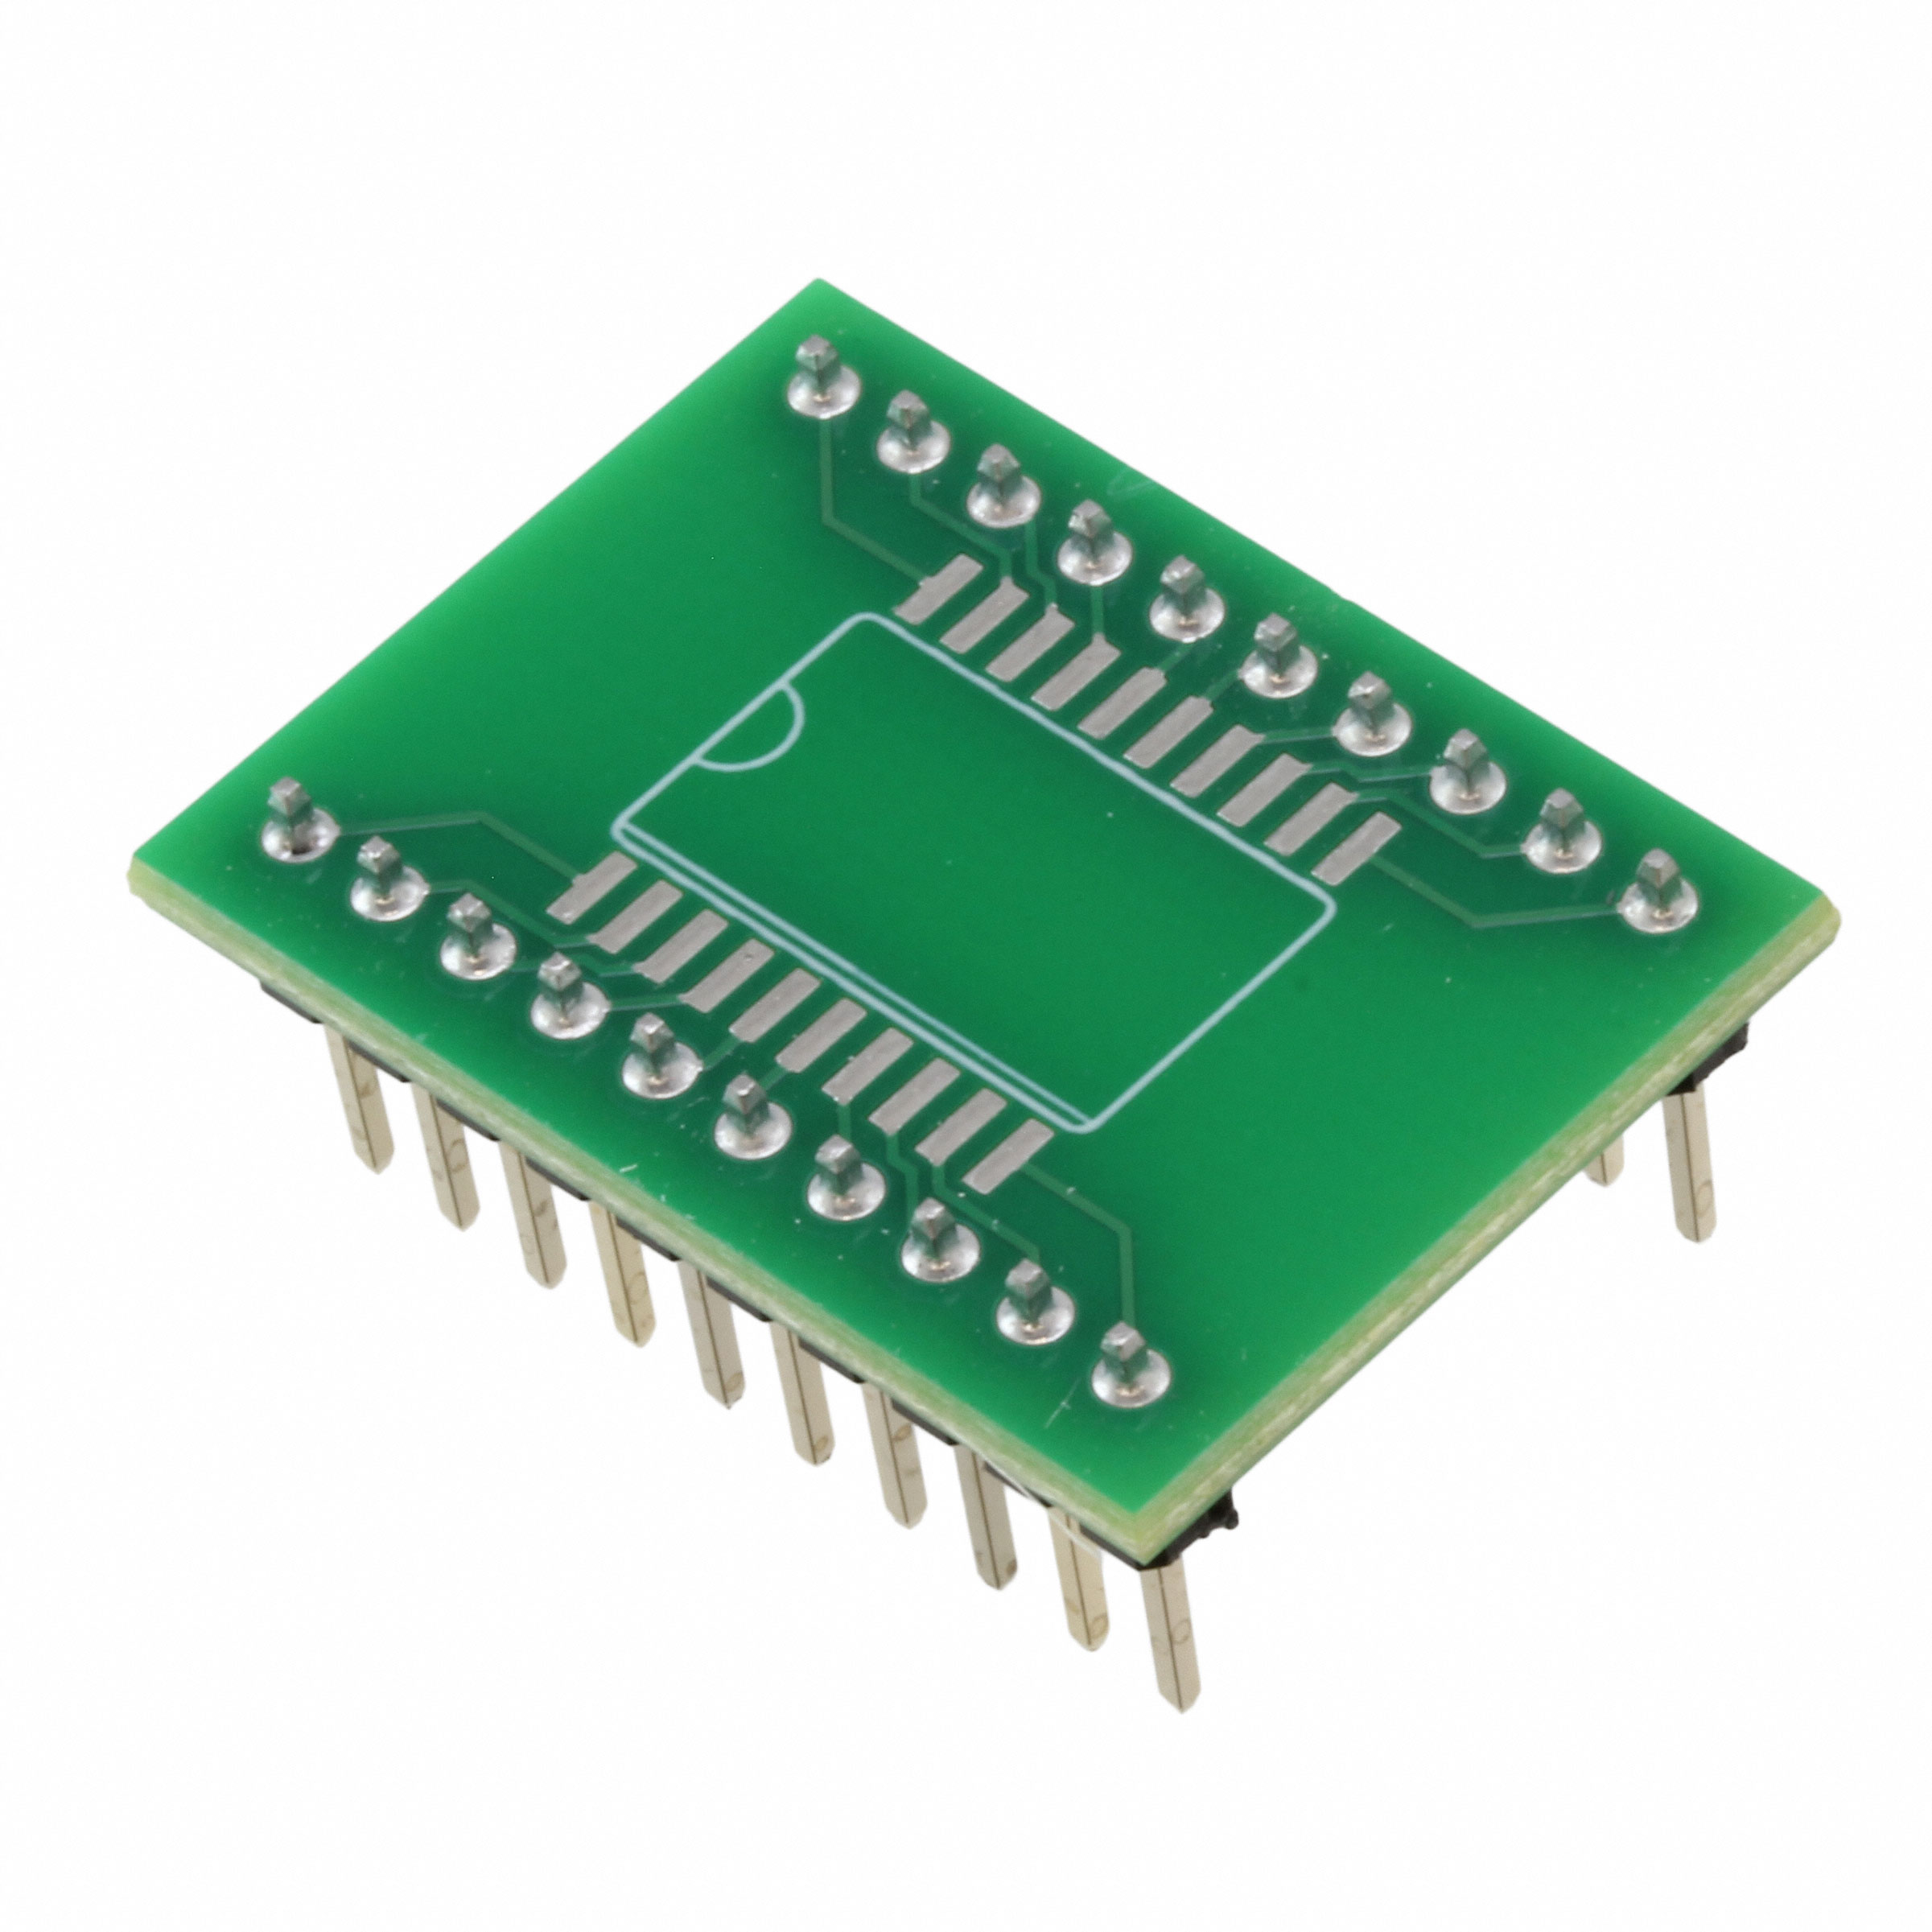 【LCQT-SOIC20W】SOCKET ADAPTER SOIC-W TO 20DIP